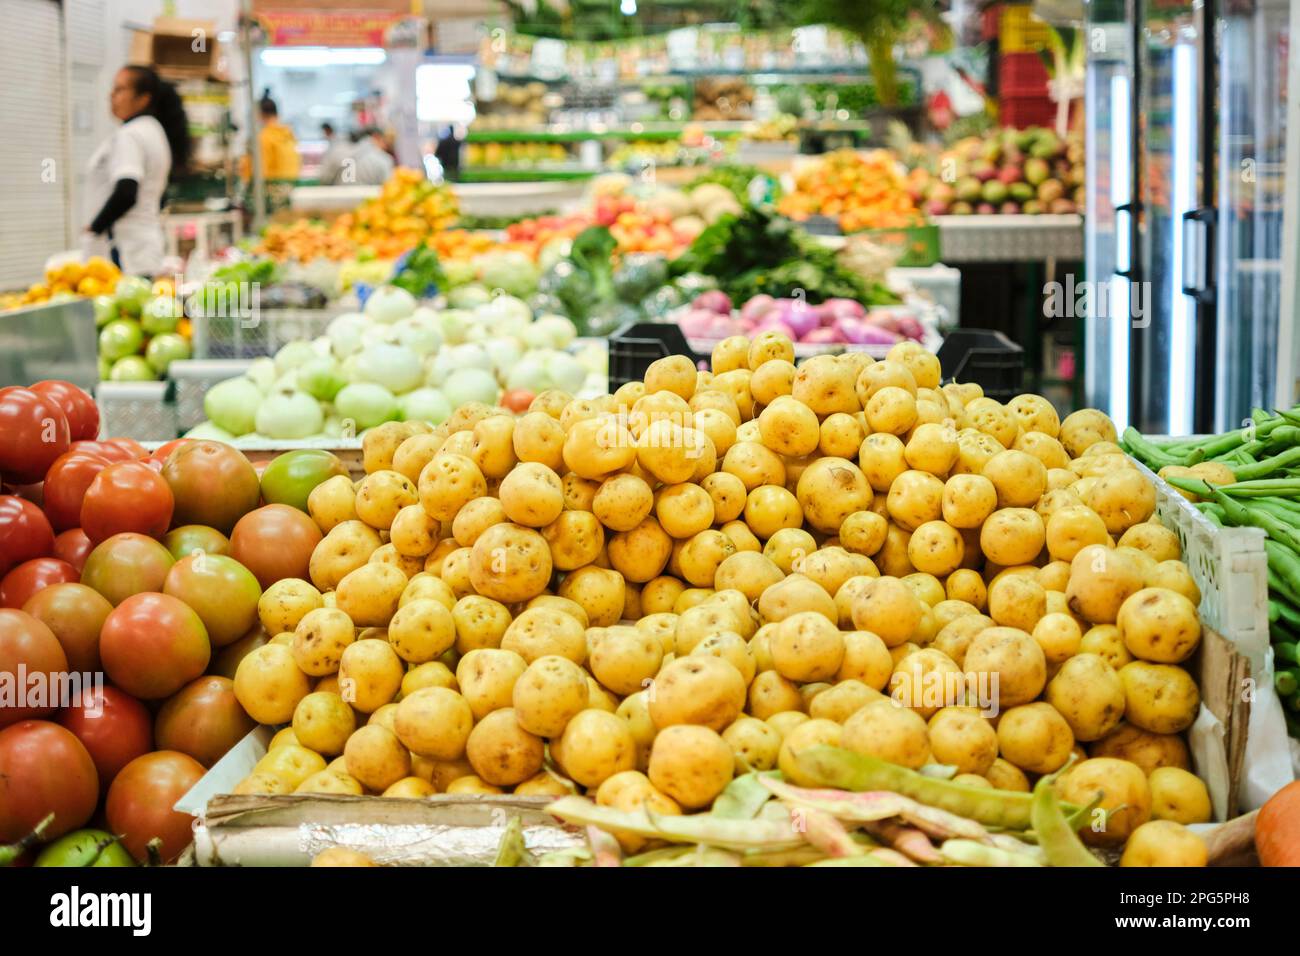 Pile of papa criolla, andean small, yellow, round potatoes in a greengrocery. Bright image with selective focus and copy space. Stock Photo